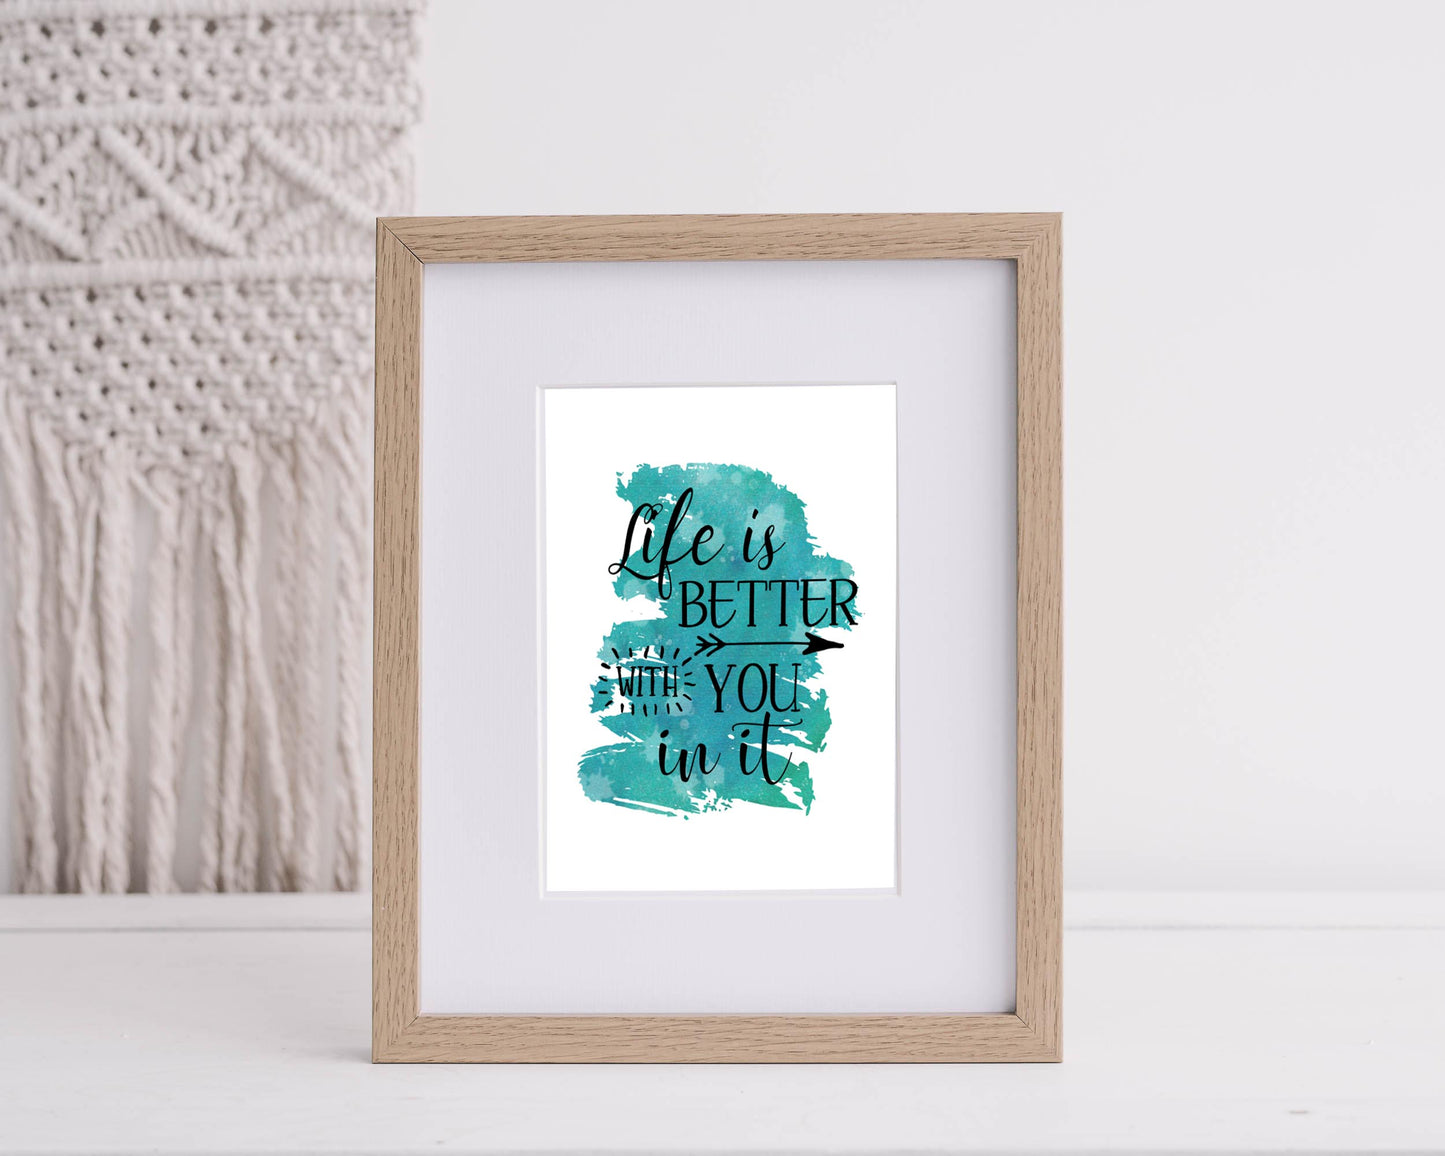 Life is Better with You in it 8x10 Art Print